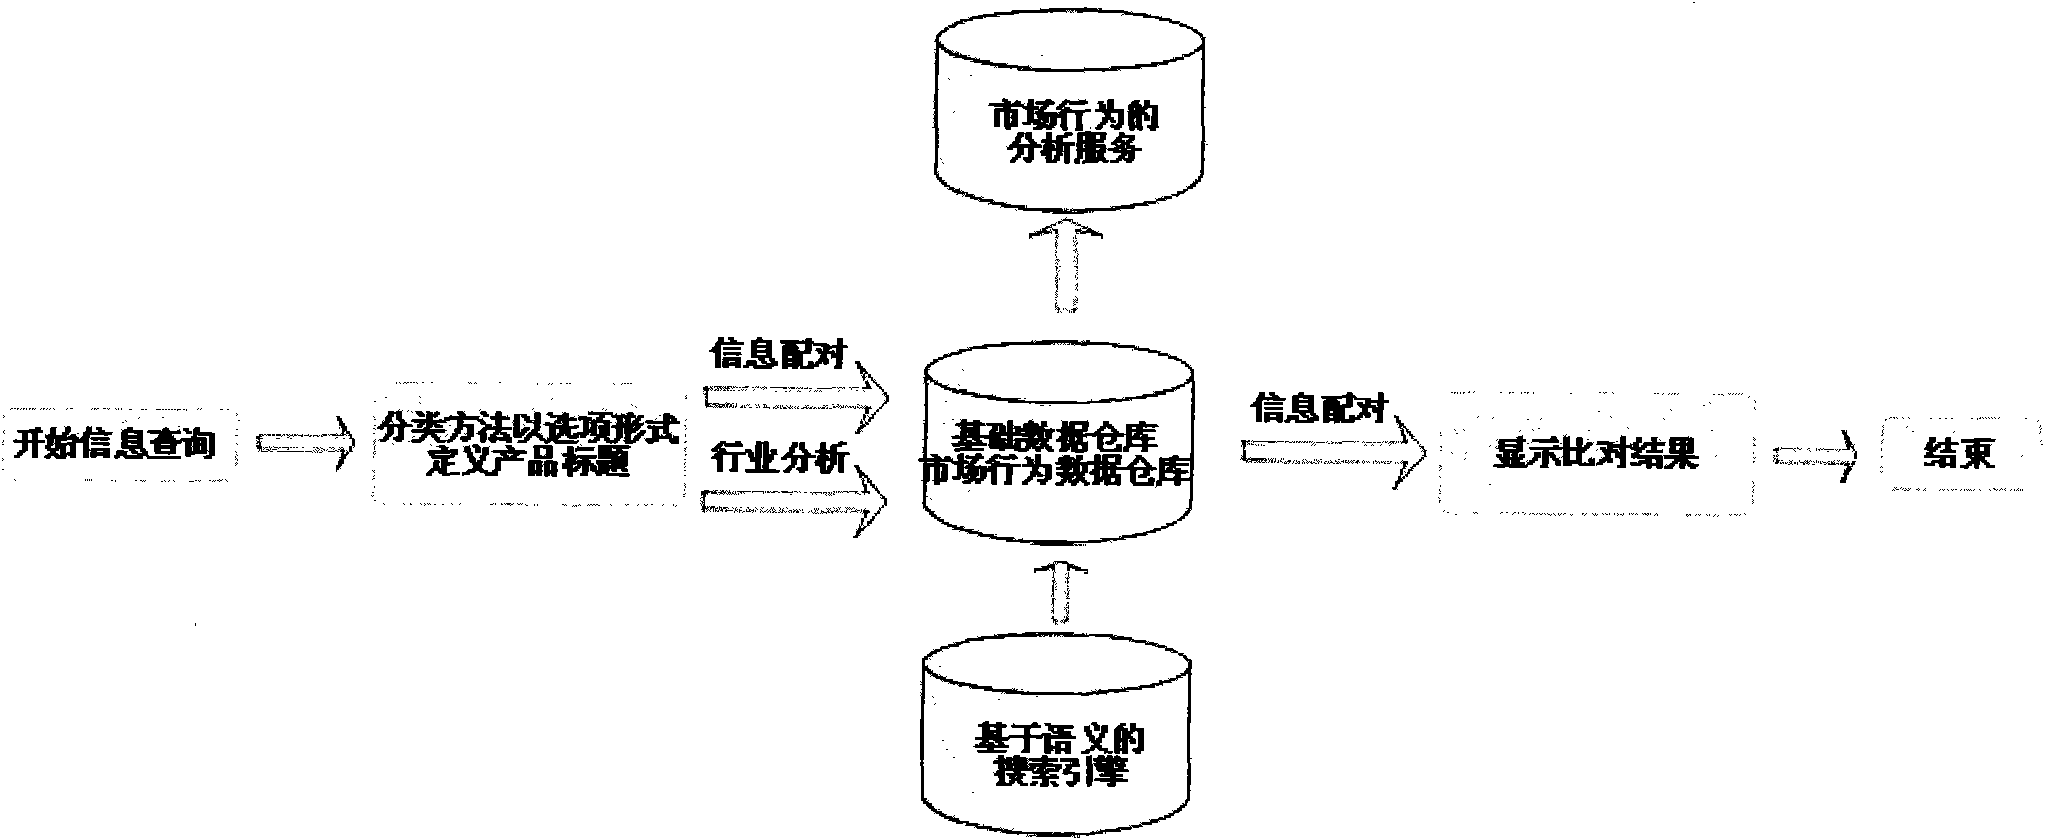 Textile raw material-oriented semantic-based data search engine